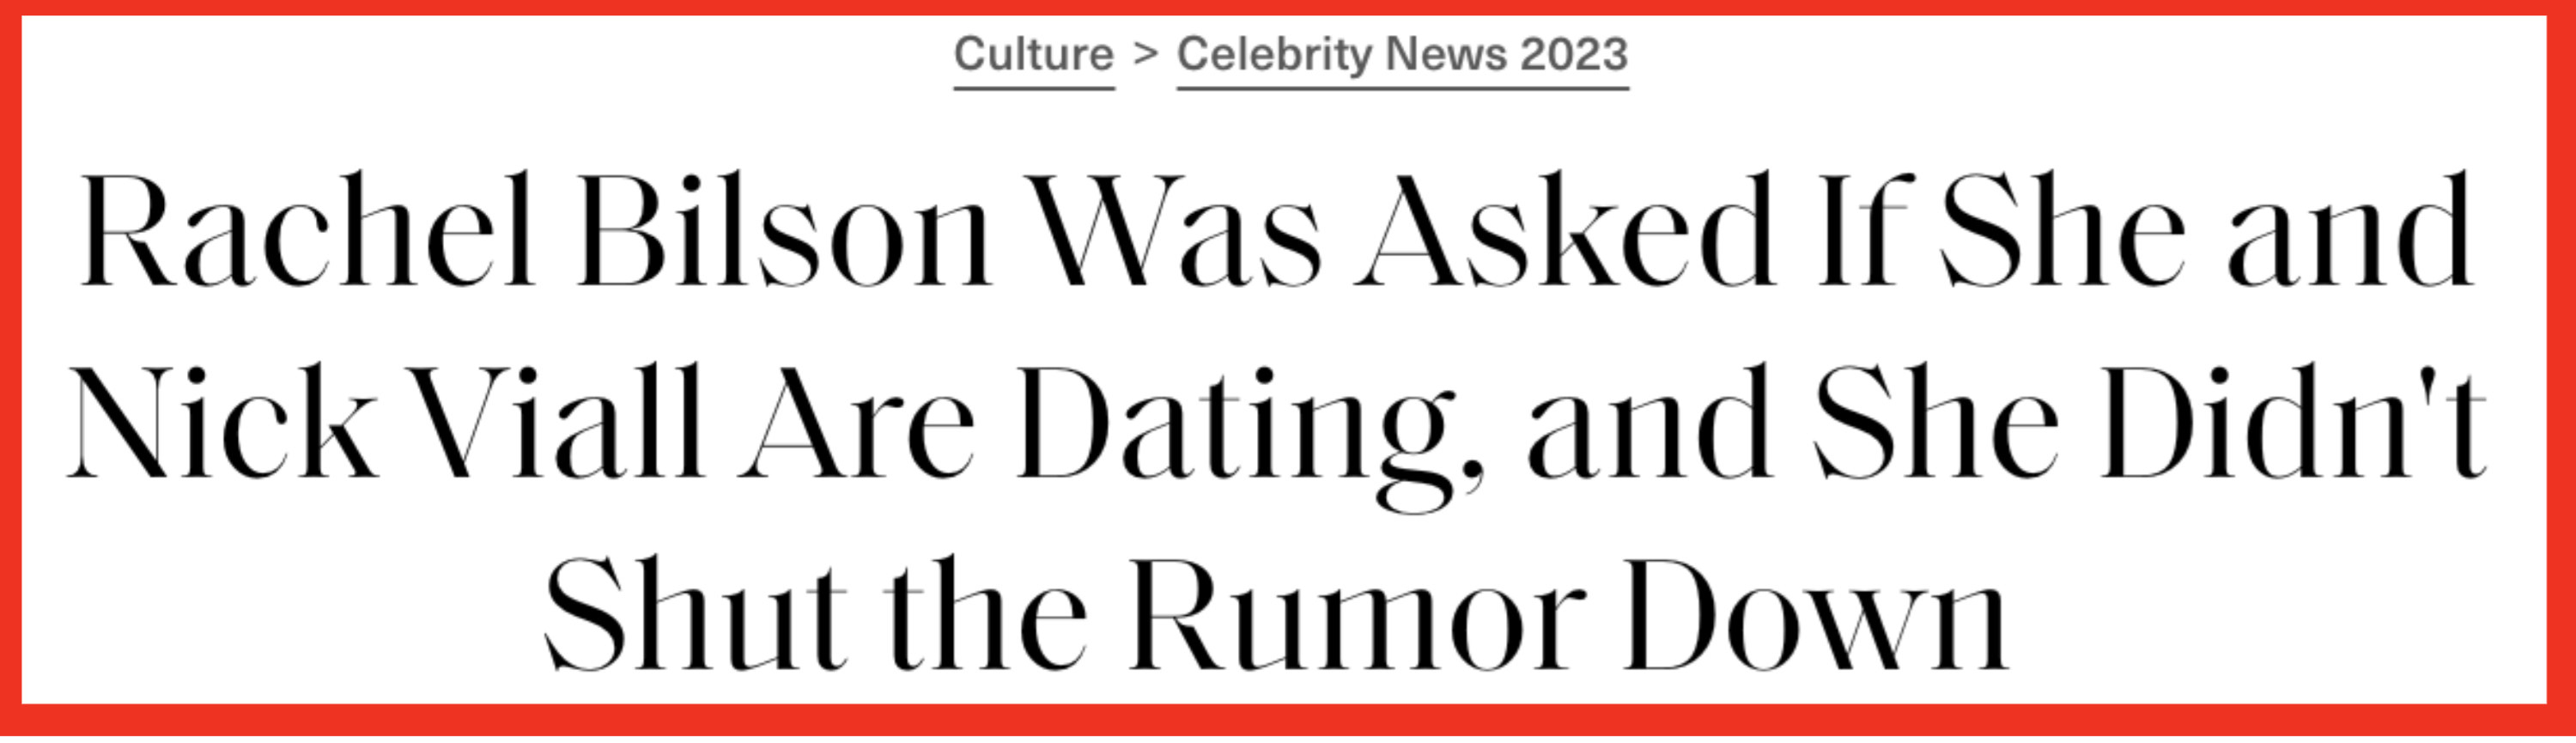 Headline: Rachel Bilson Was Asked If She and Nick Viall Are Dating, and She Didn&#x27;t Shut the Rumor Down&quot;